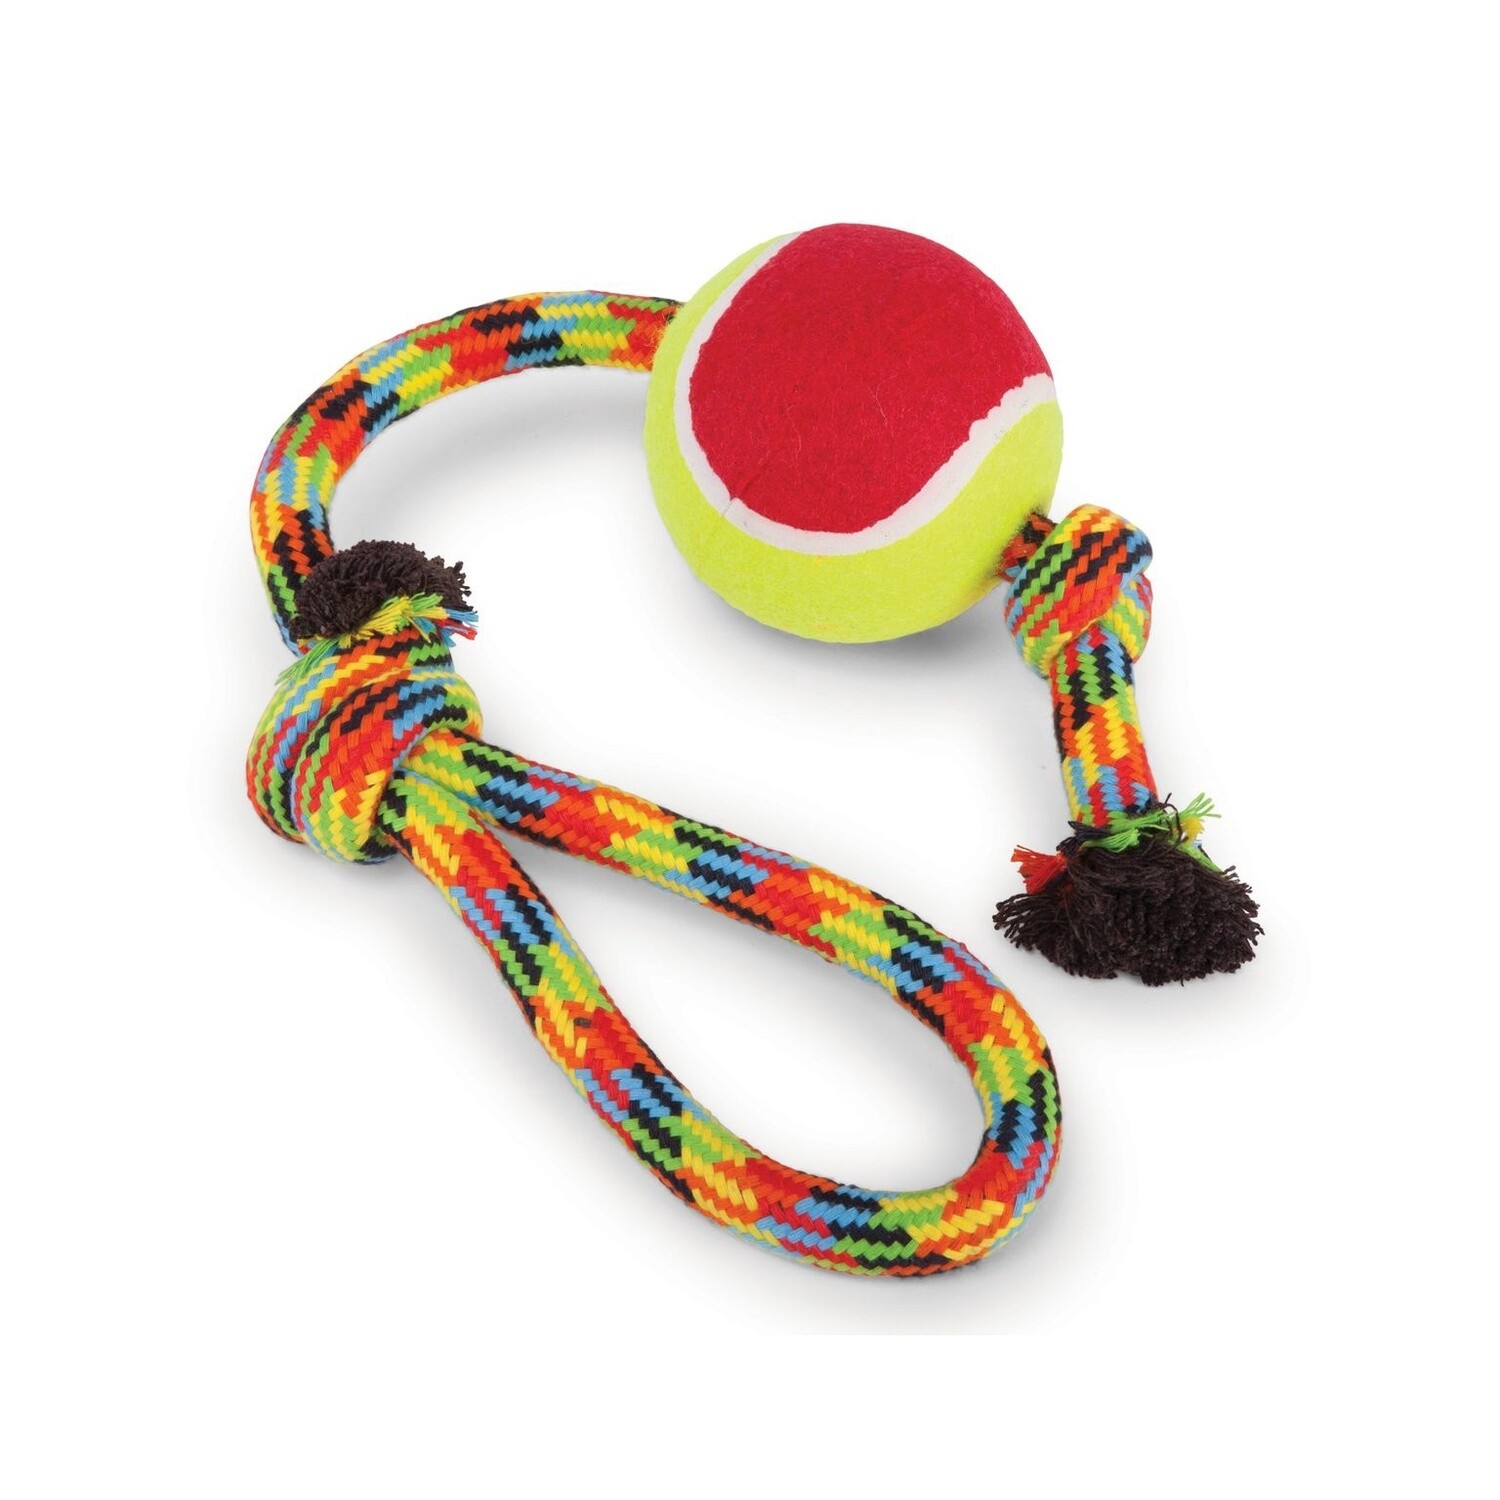 Braided Rope Sling Tennis Ball - Large